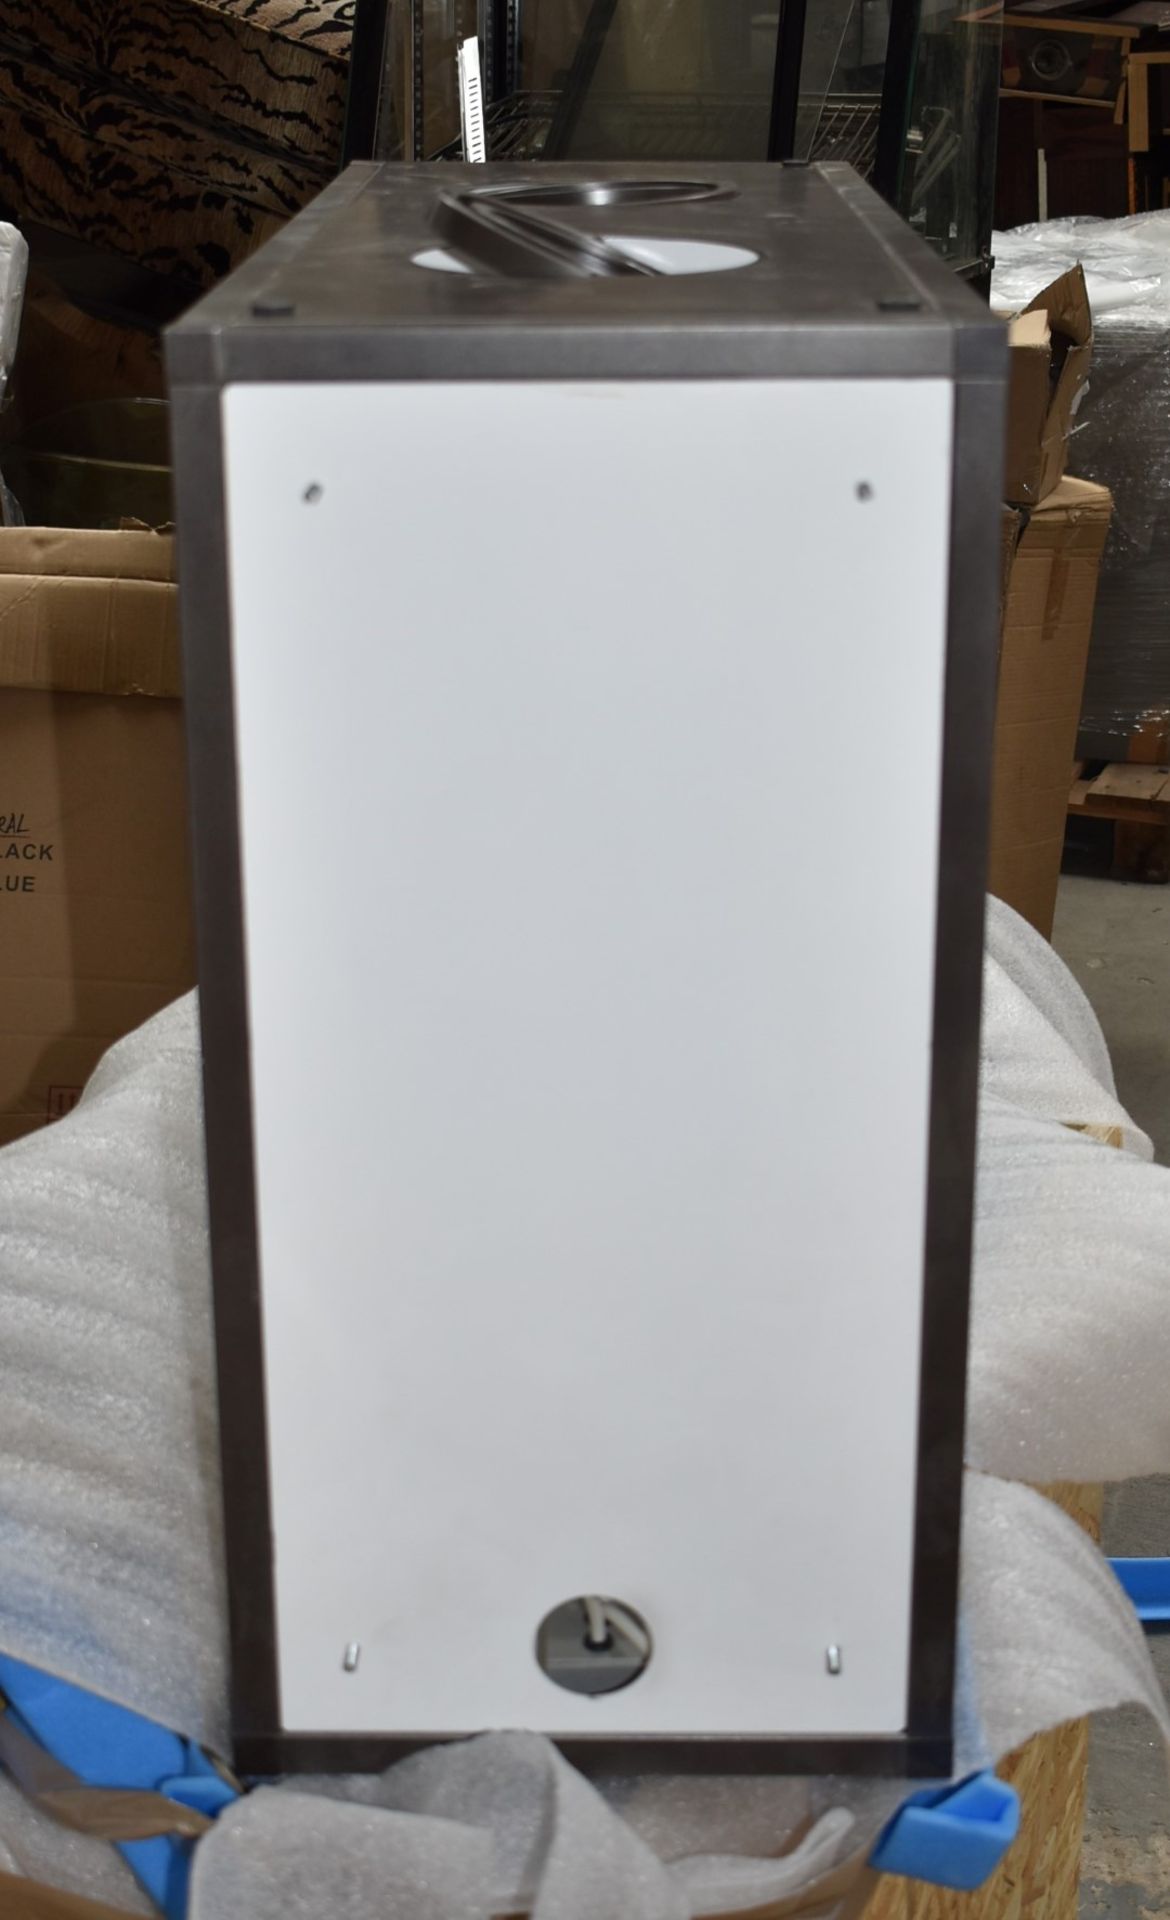 1 x Illuminated Ceiling Light From a Famous London Department Store - 5 Interconnecting Box Lights - Image 19 of 22